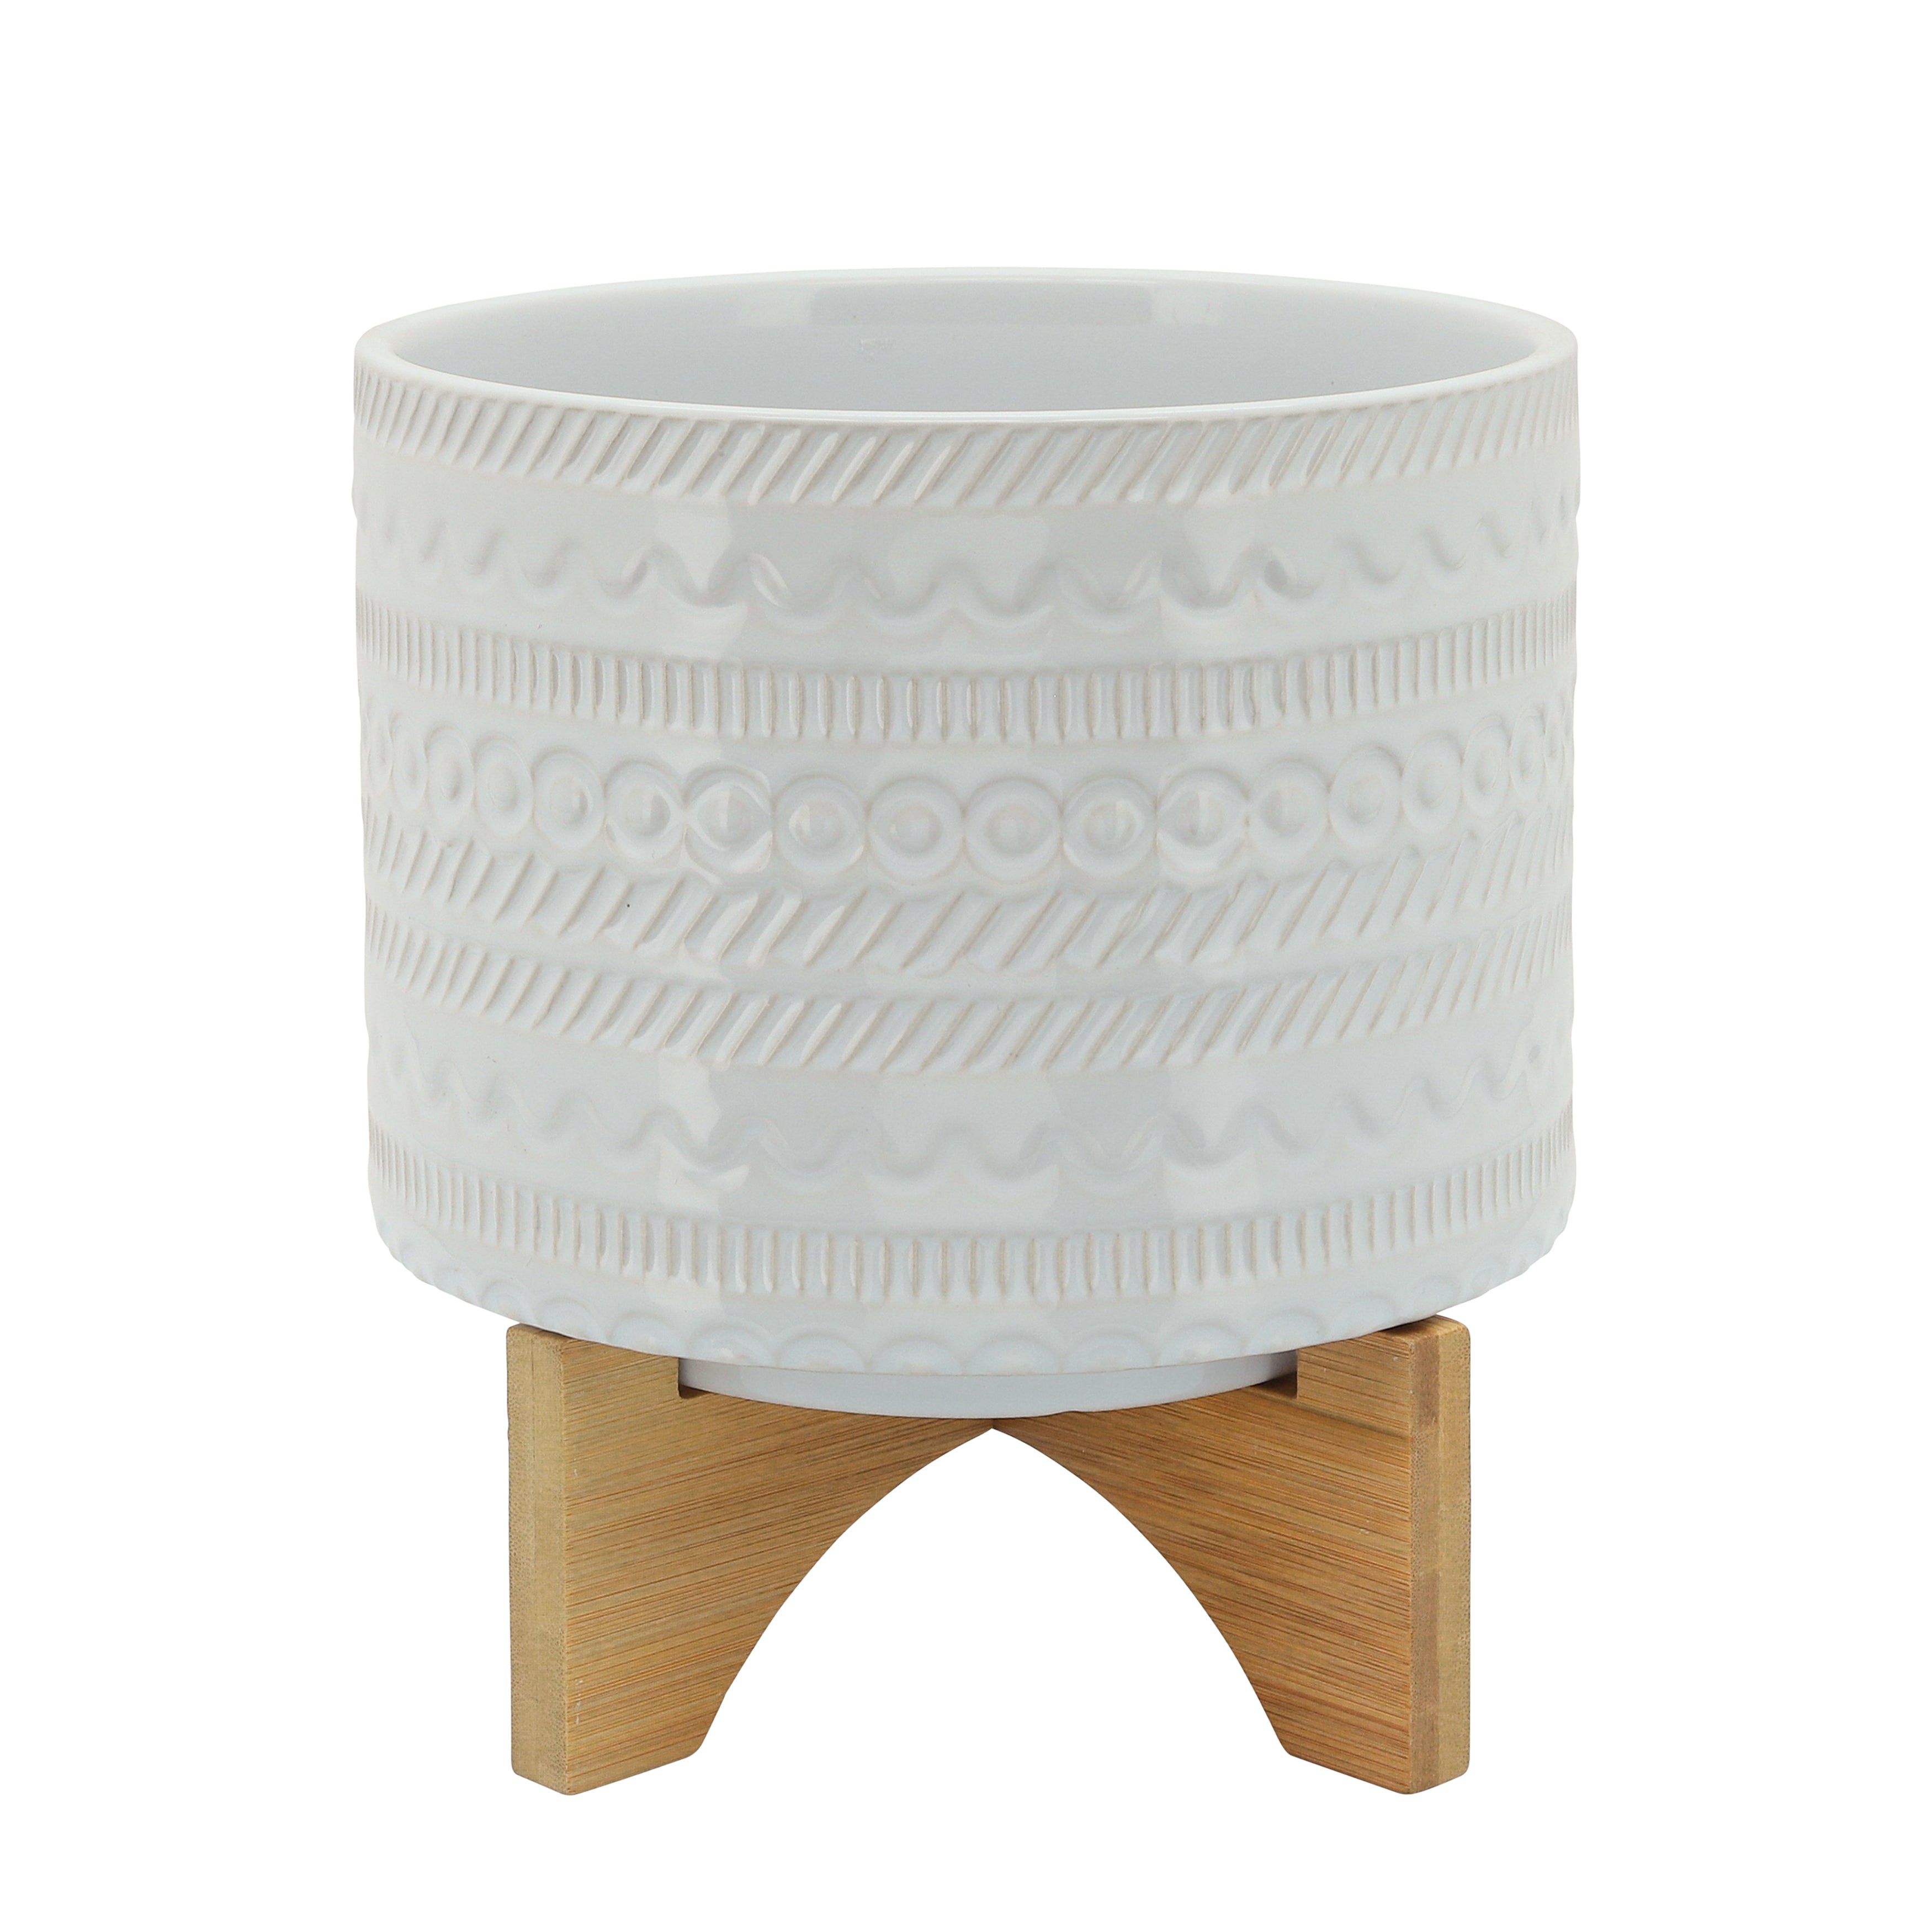 8" Tribal Planter with Wood Stand, White, Planters